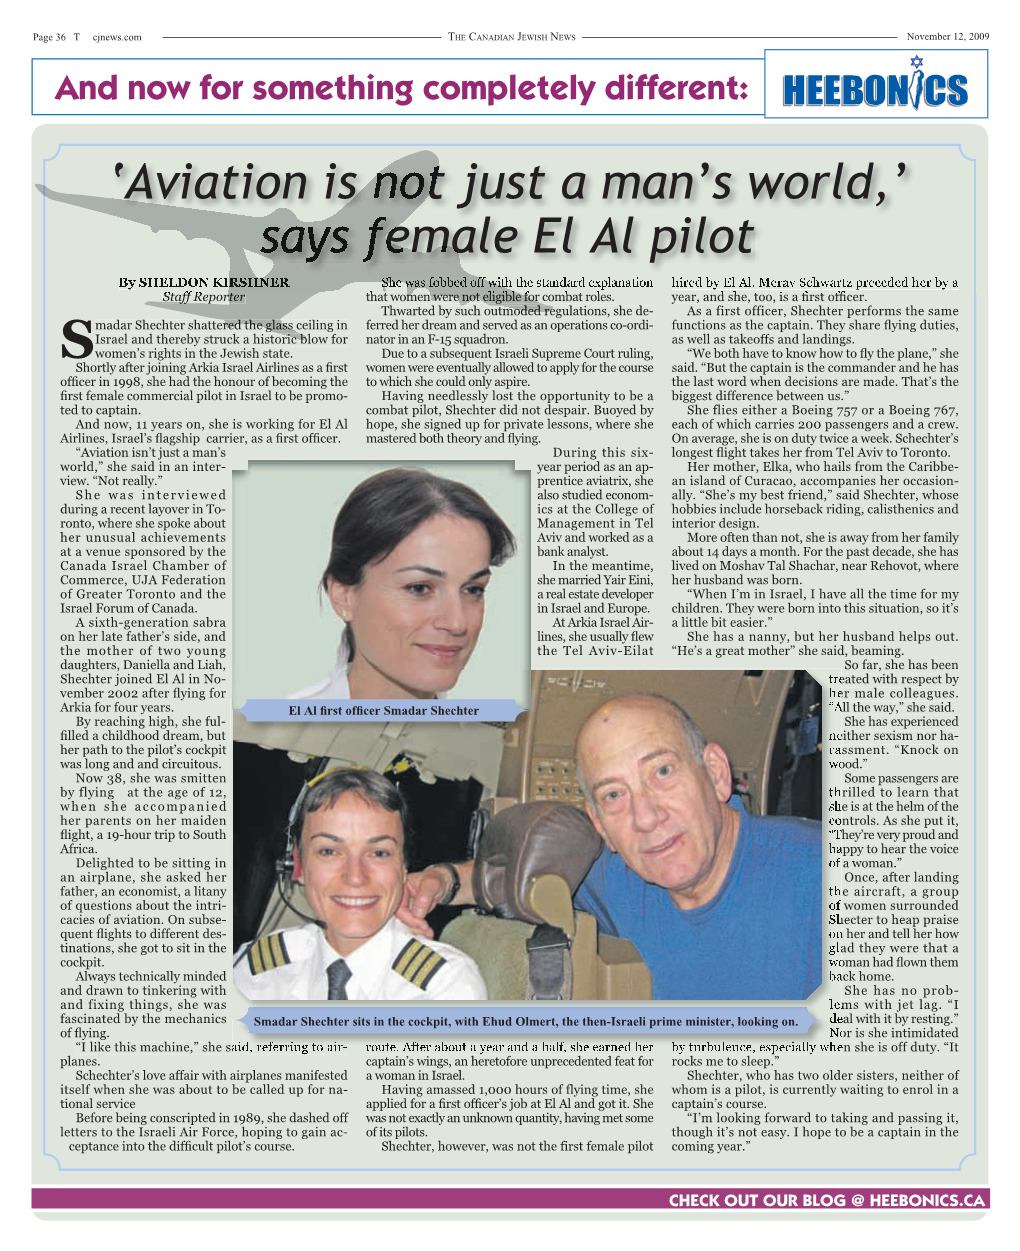 Says Female El Al Pilot by SHELDON KIRSHNER She Was Fobbed Off with the Standard Explanation Hired by El Al